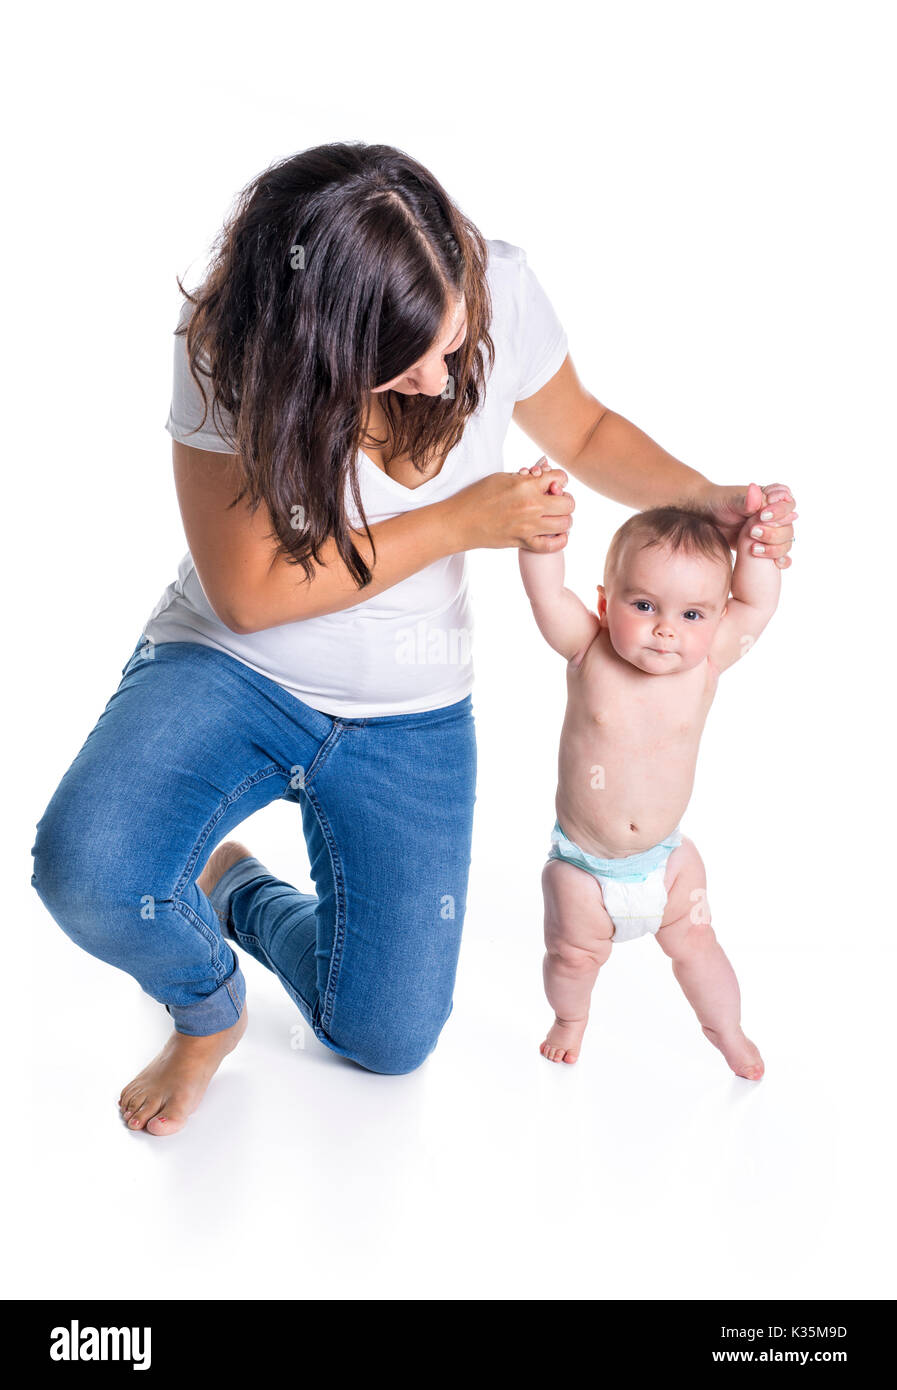 baby taking first steps with mother help on white background Stock Photo